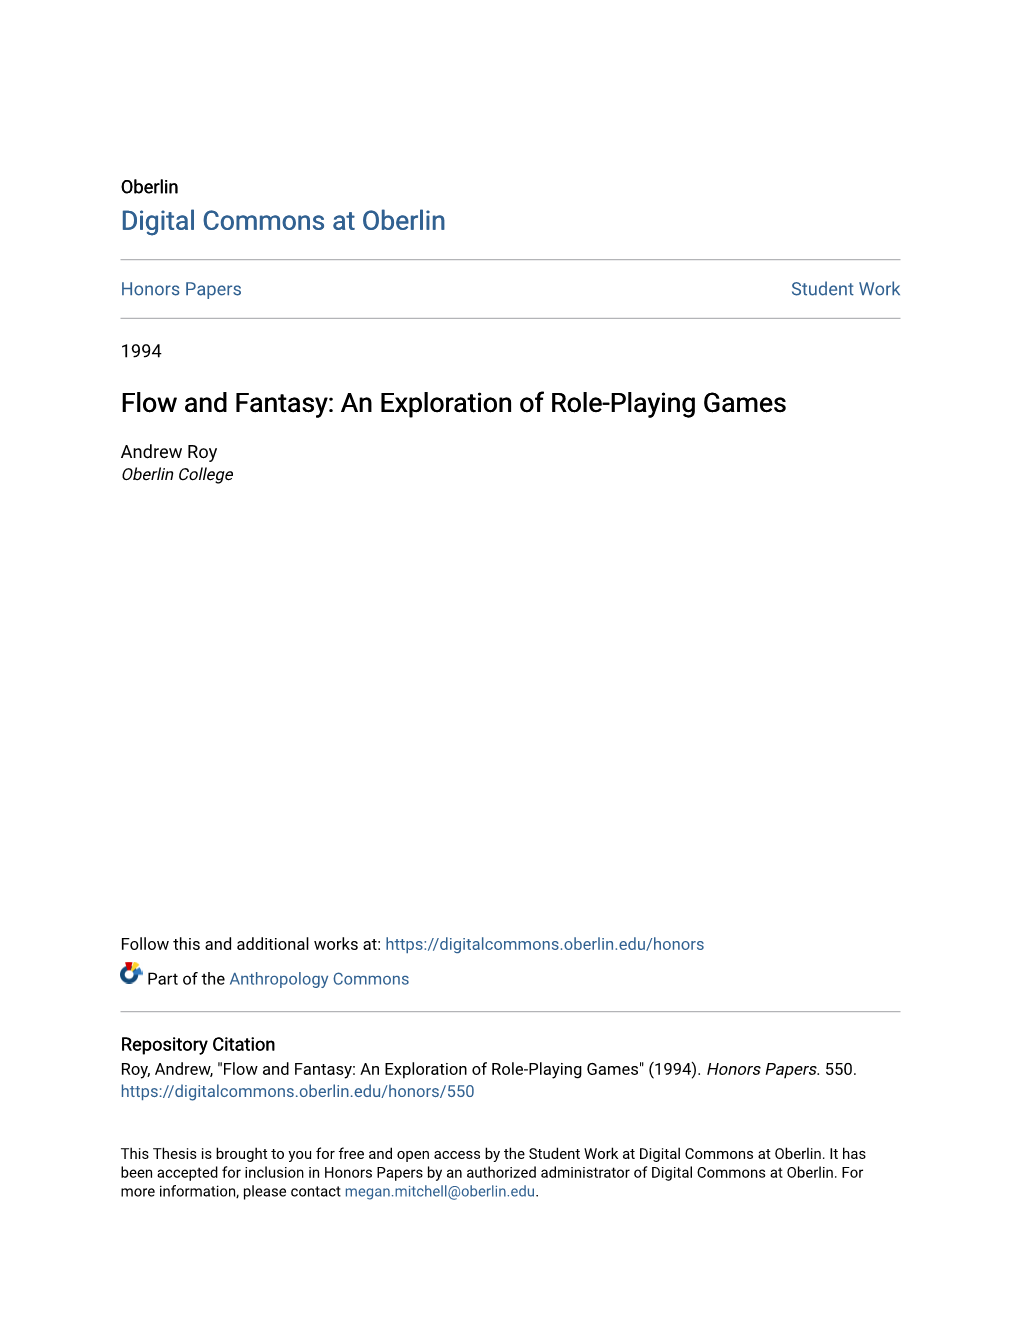 An Exploration of Role-Playing Games